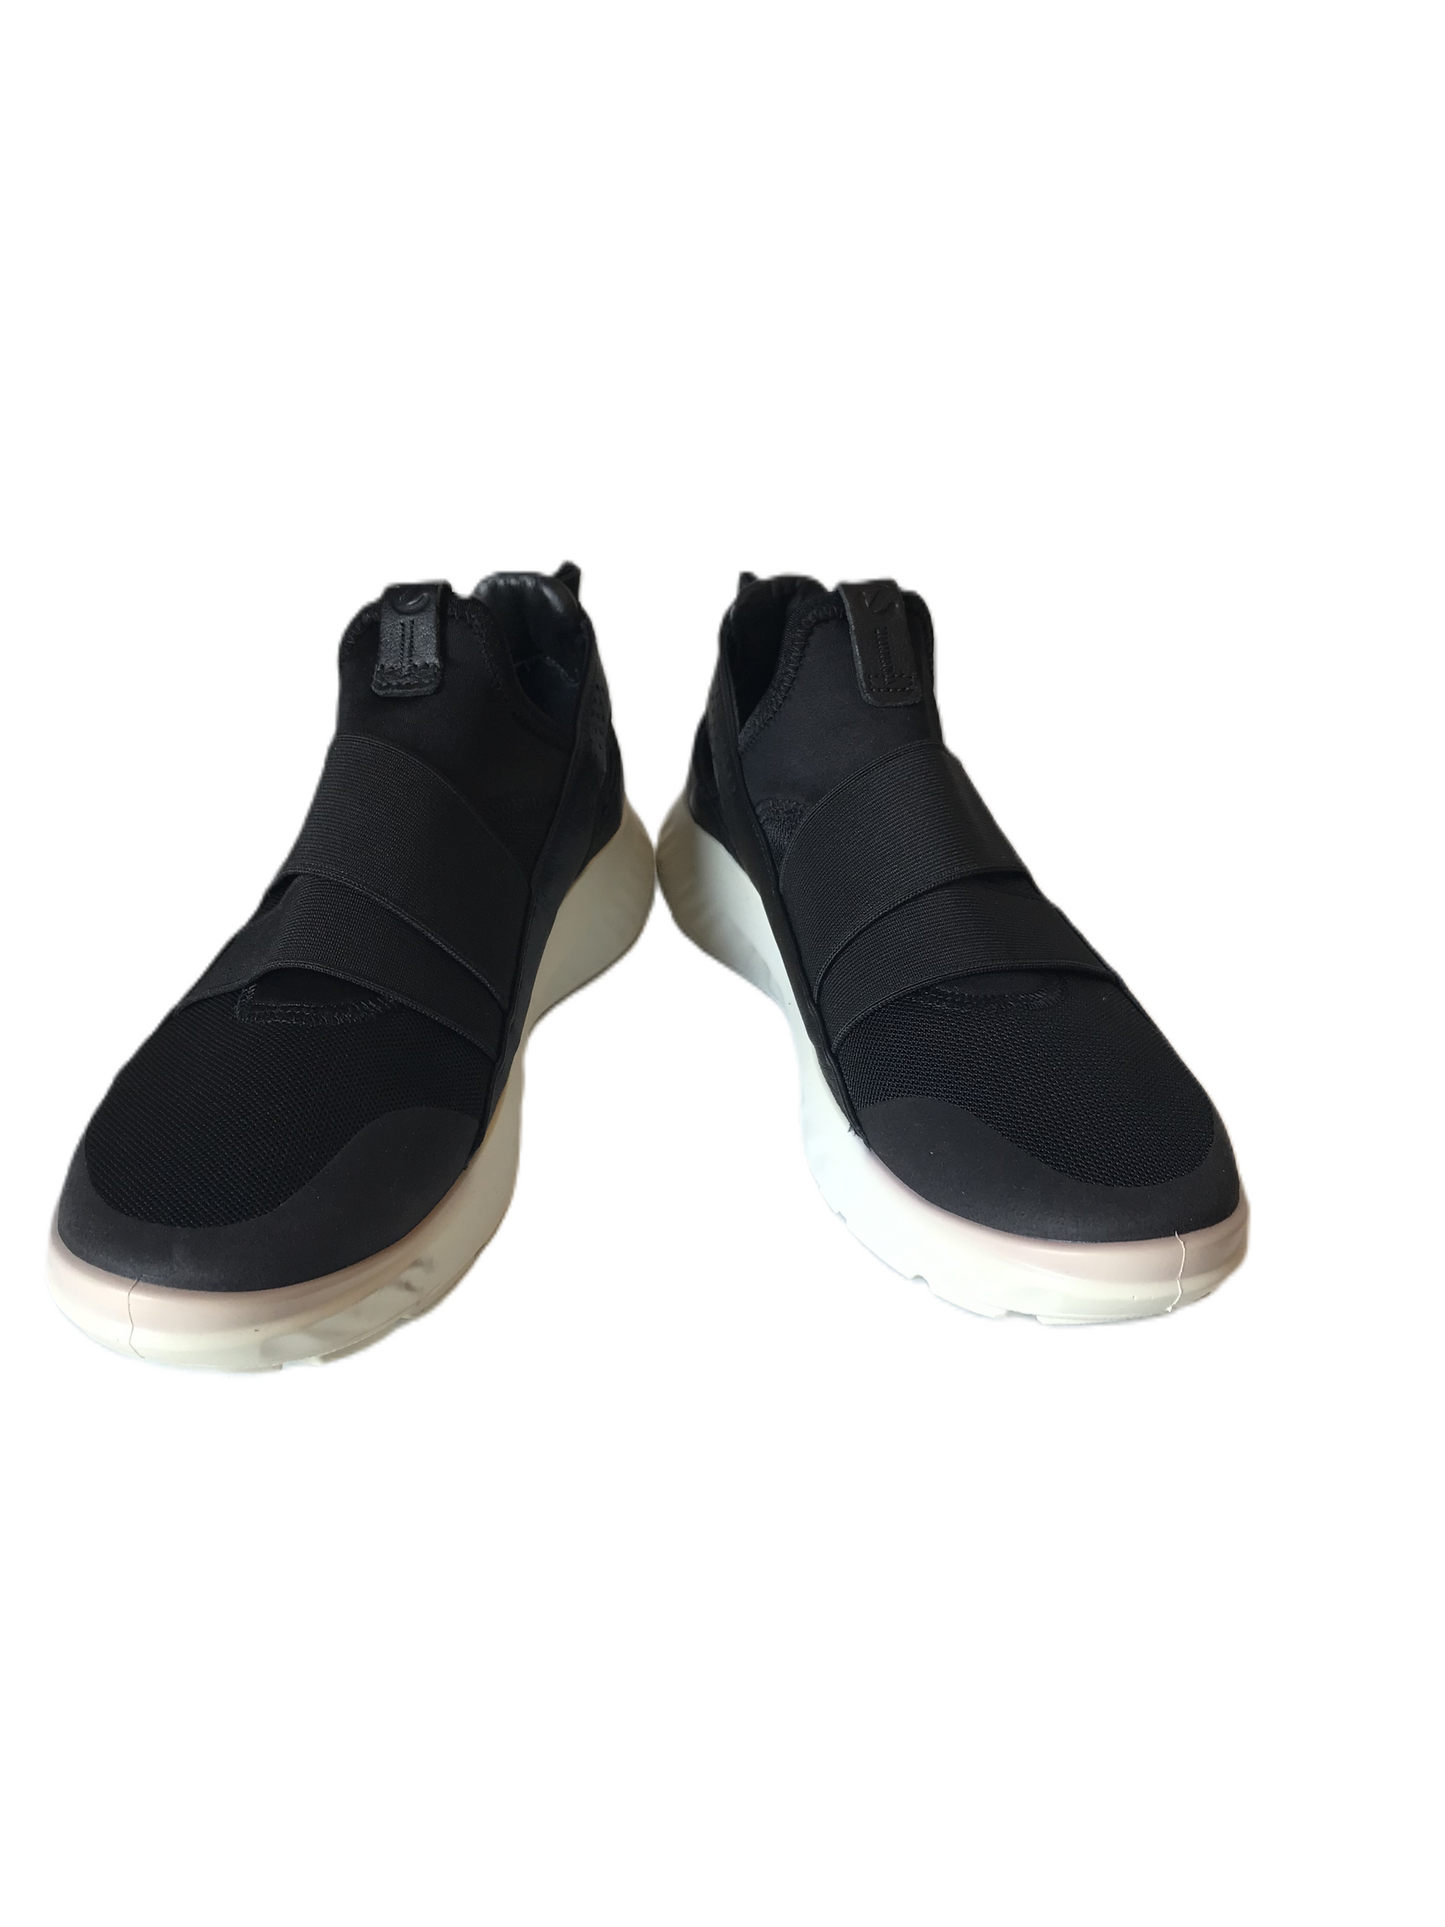 Black Shoes Sneakers By Ecco, Size: 9